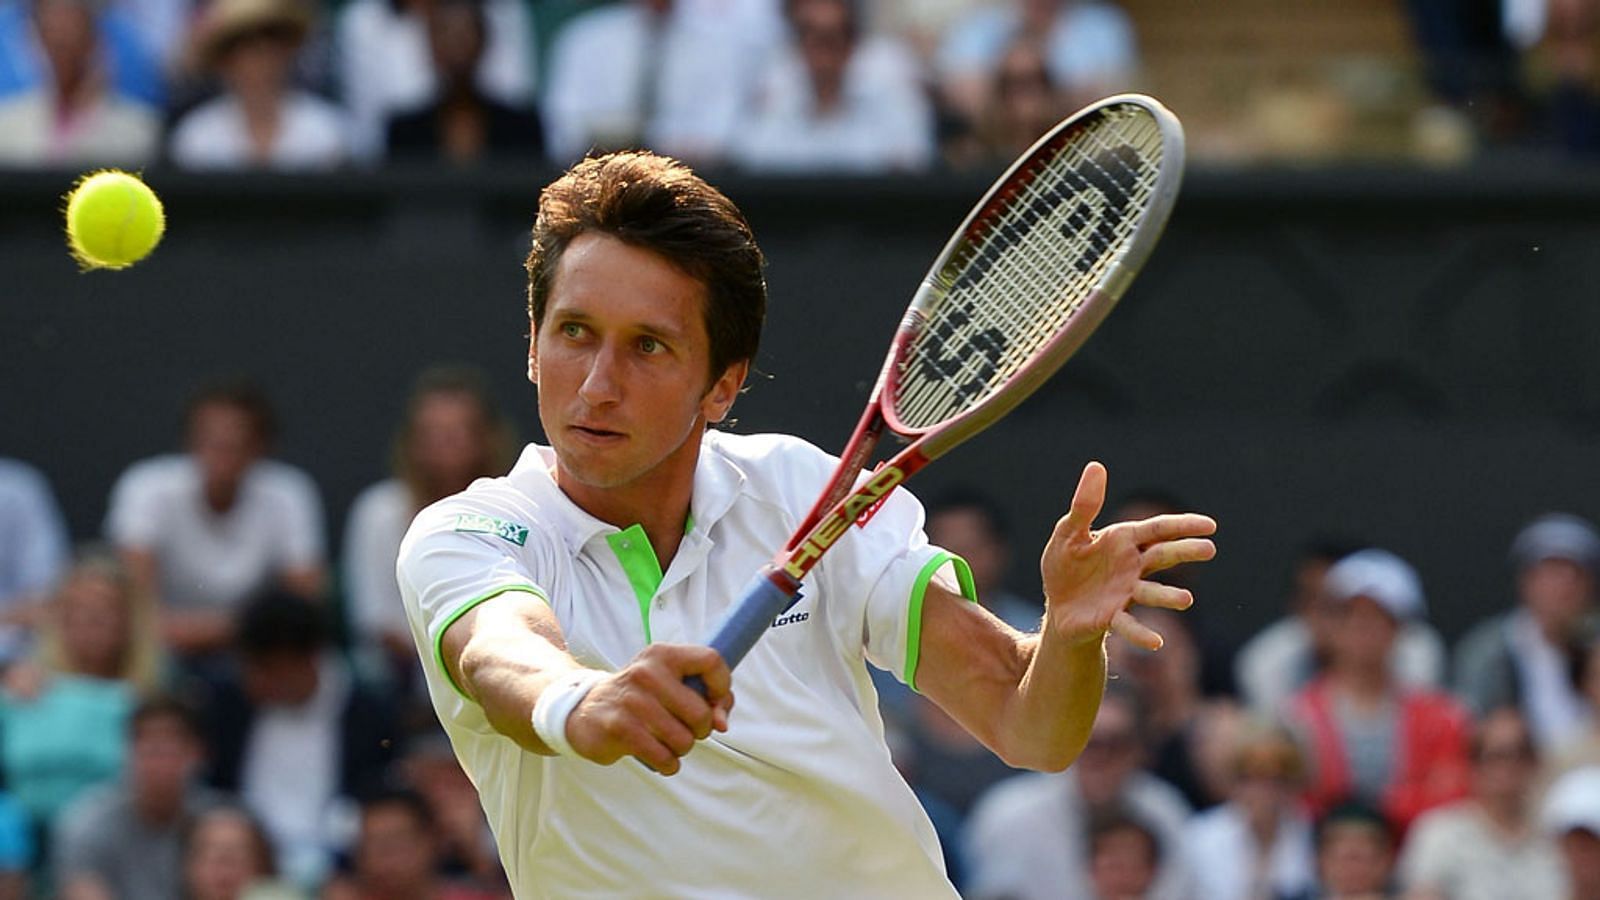 Sergiy Stakhovsky at Wimbledon in 2013